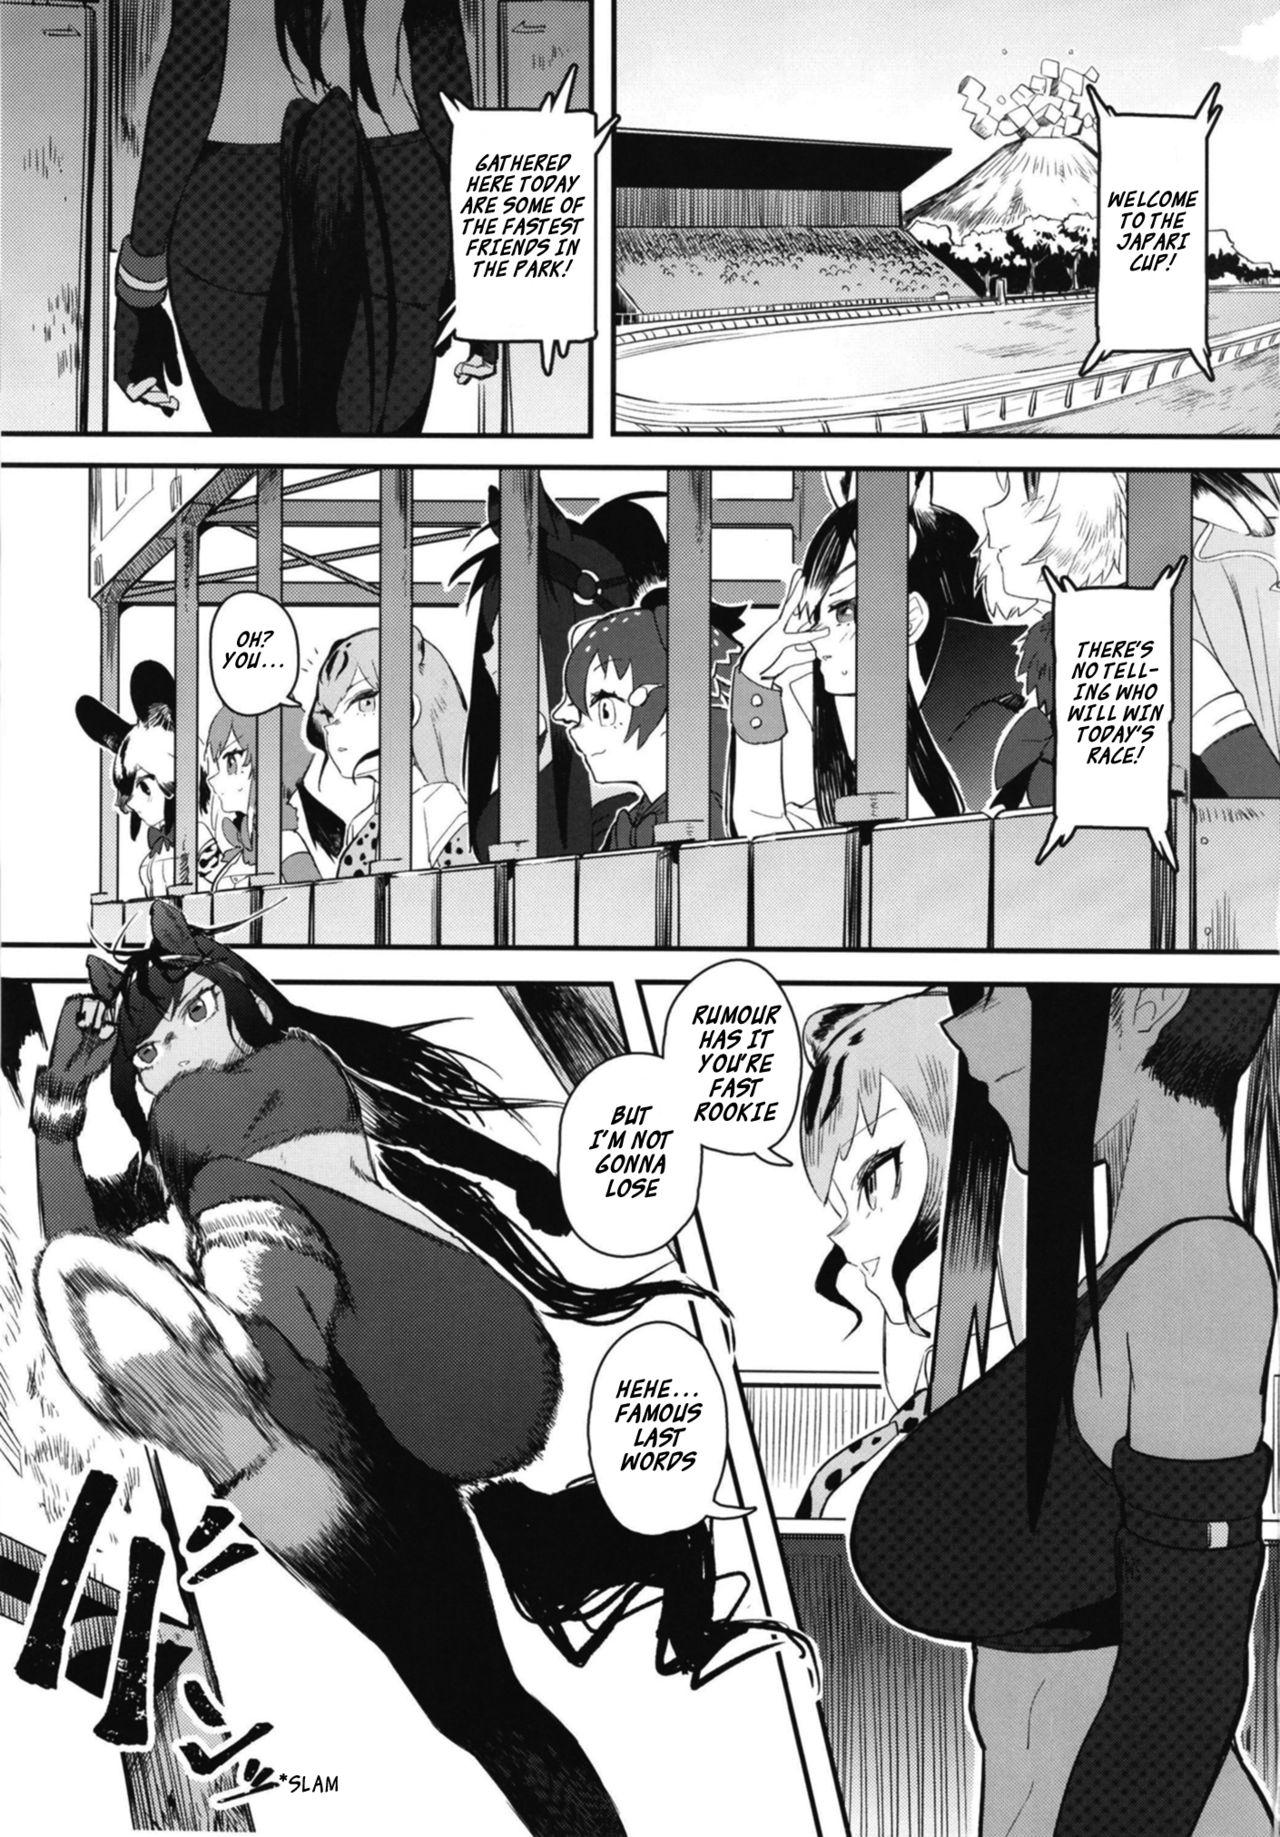 Hot Thoroughbred Early Days 2 - Kemono friends Cogida - Page 3